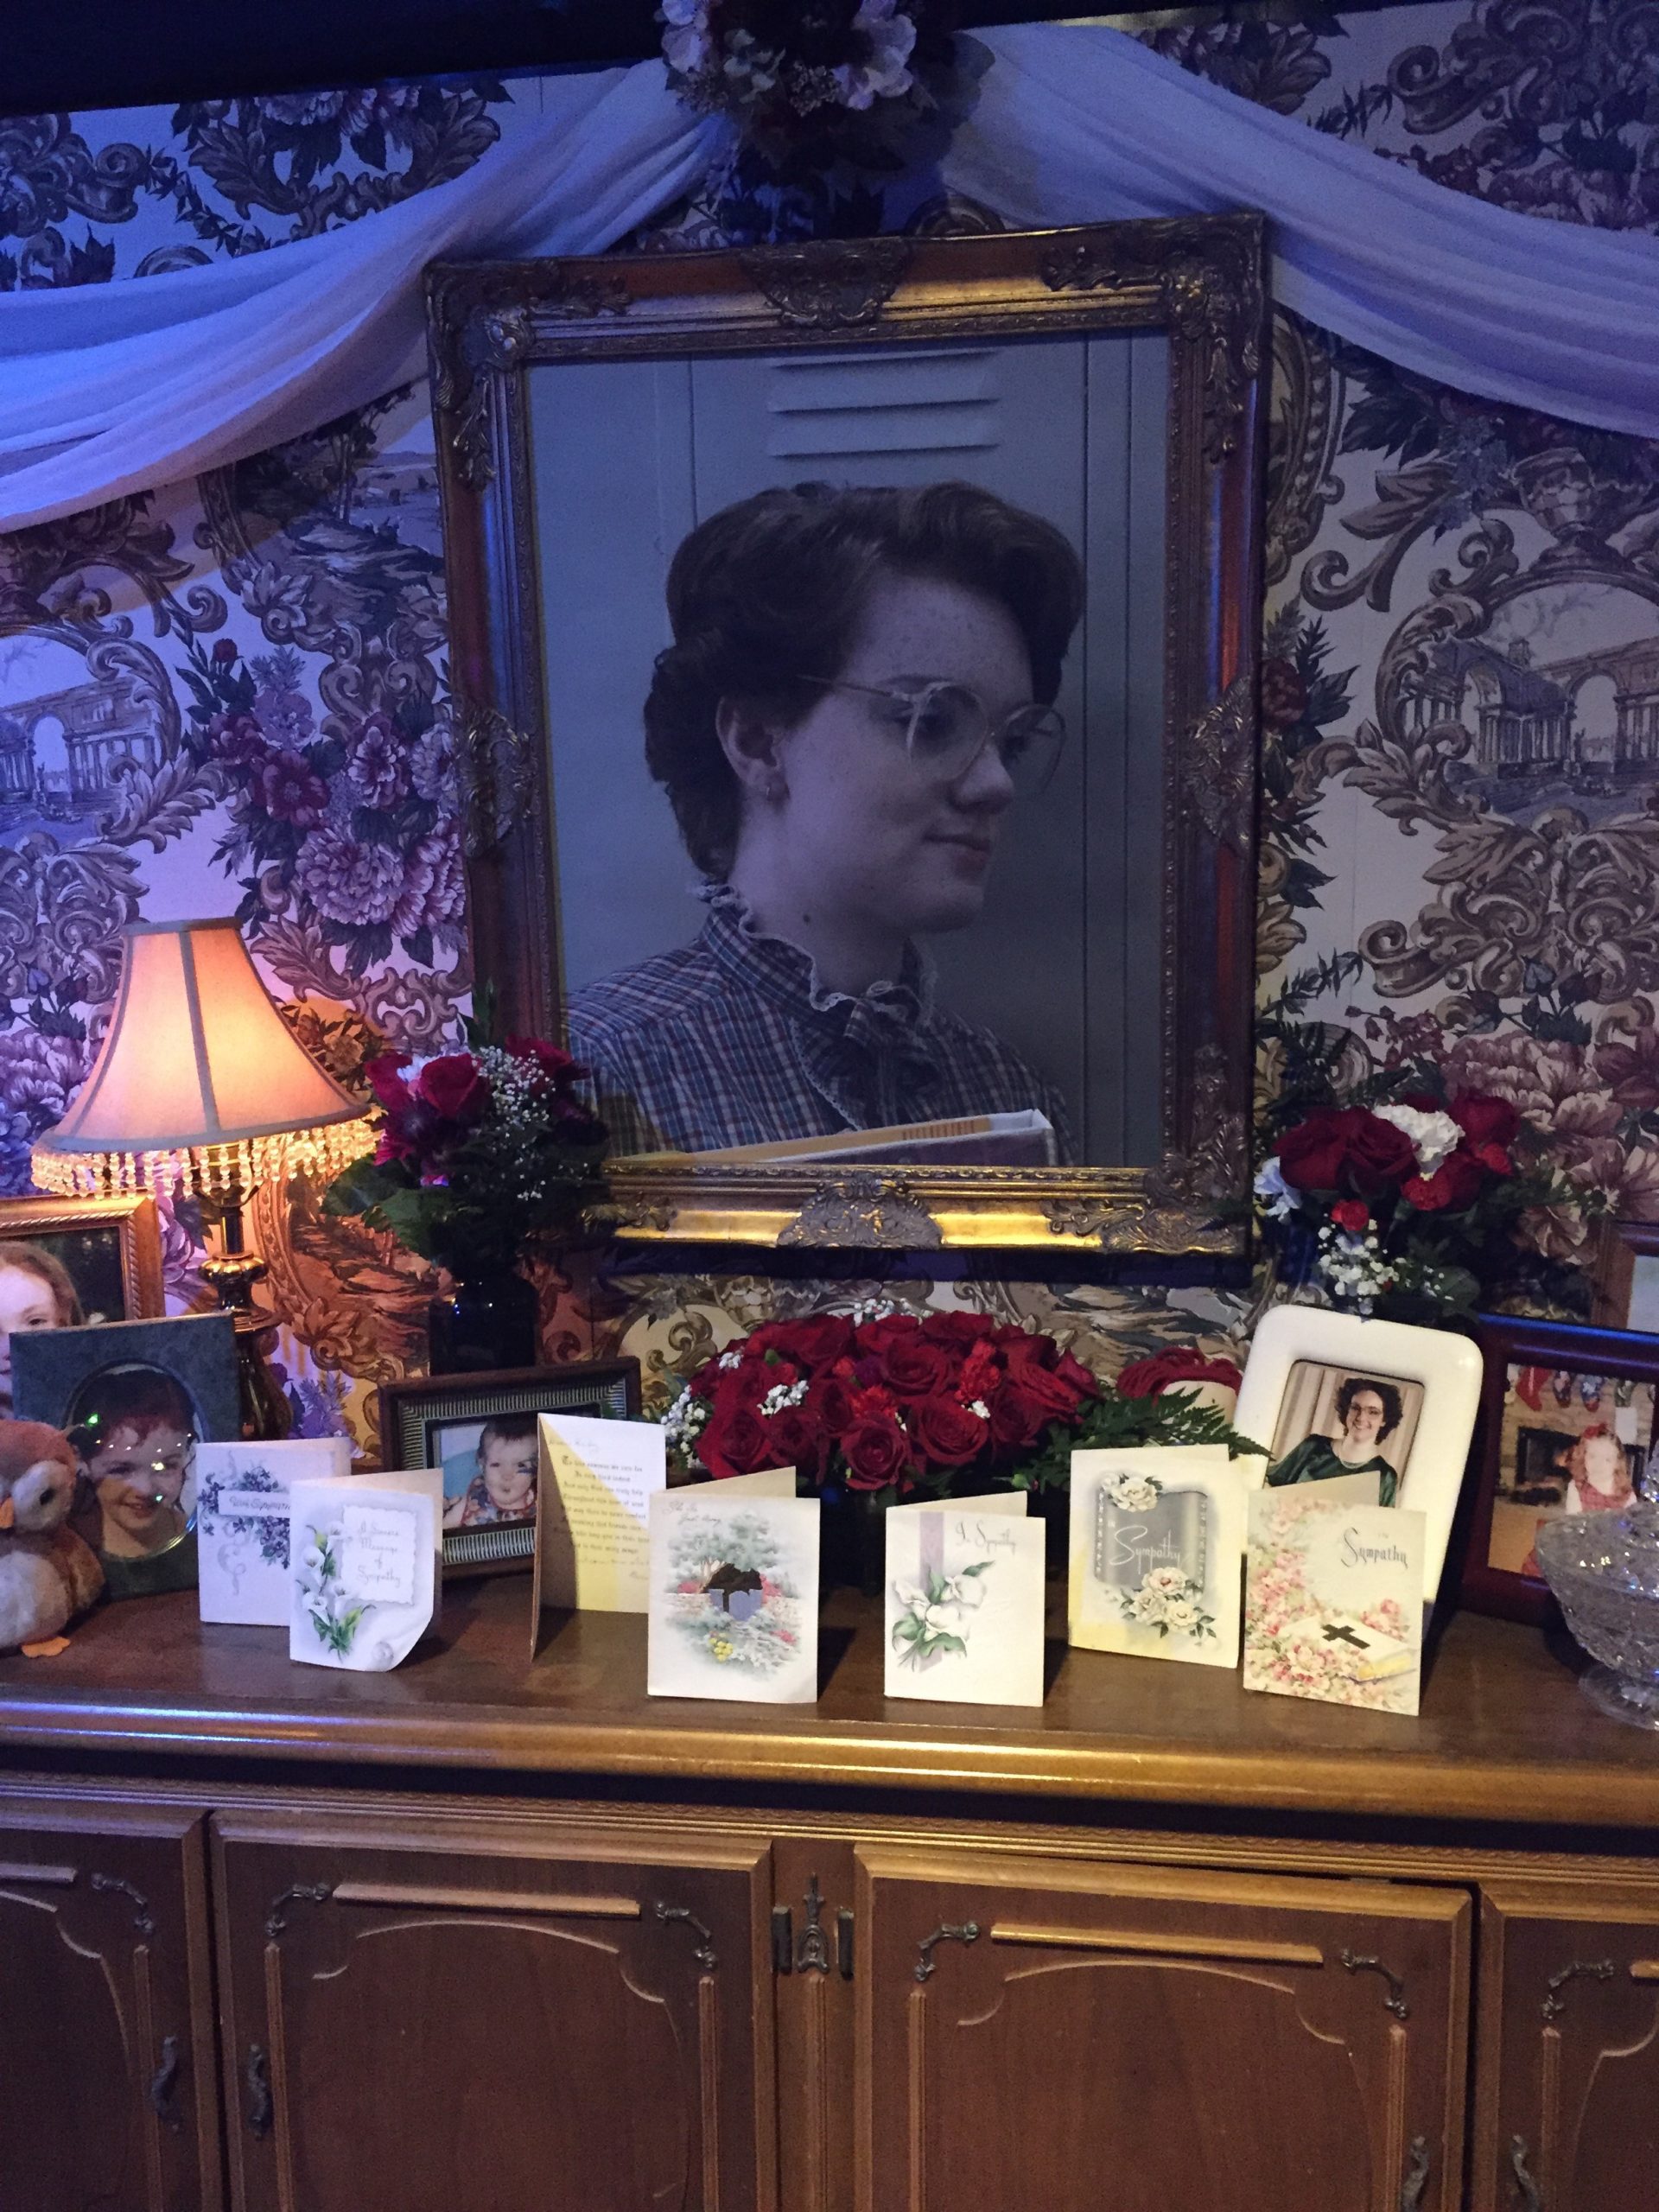 Stranger Things’ Barb Finally Got A Tribute In The Form Of A Very Tacky Shrine